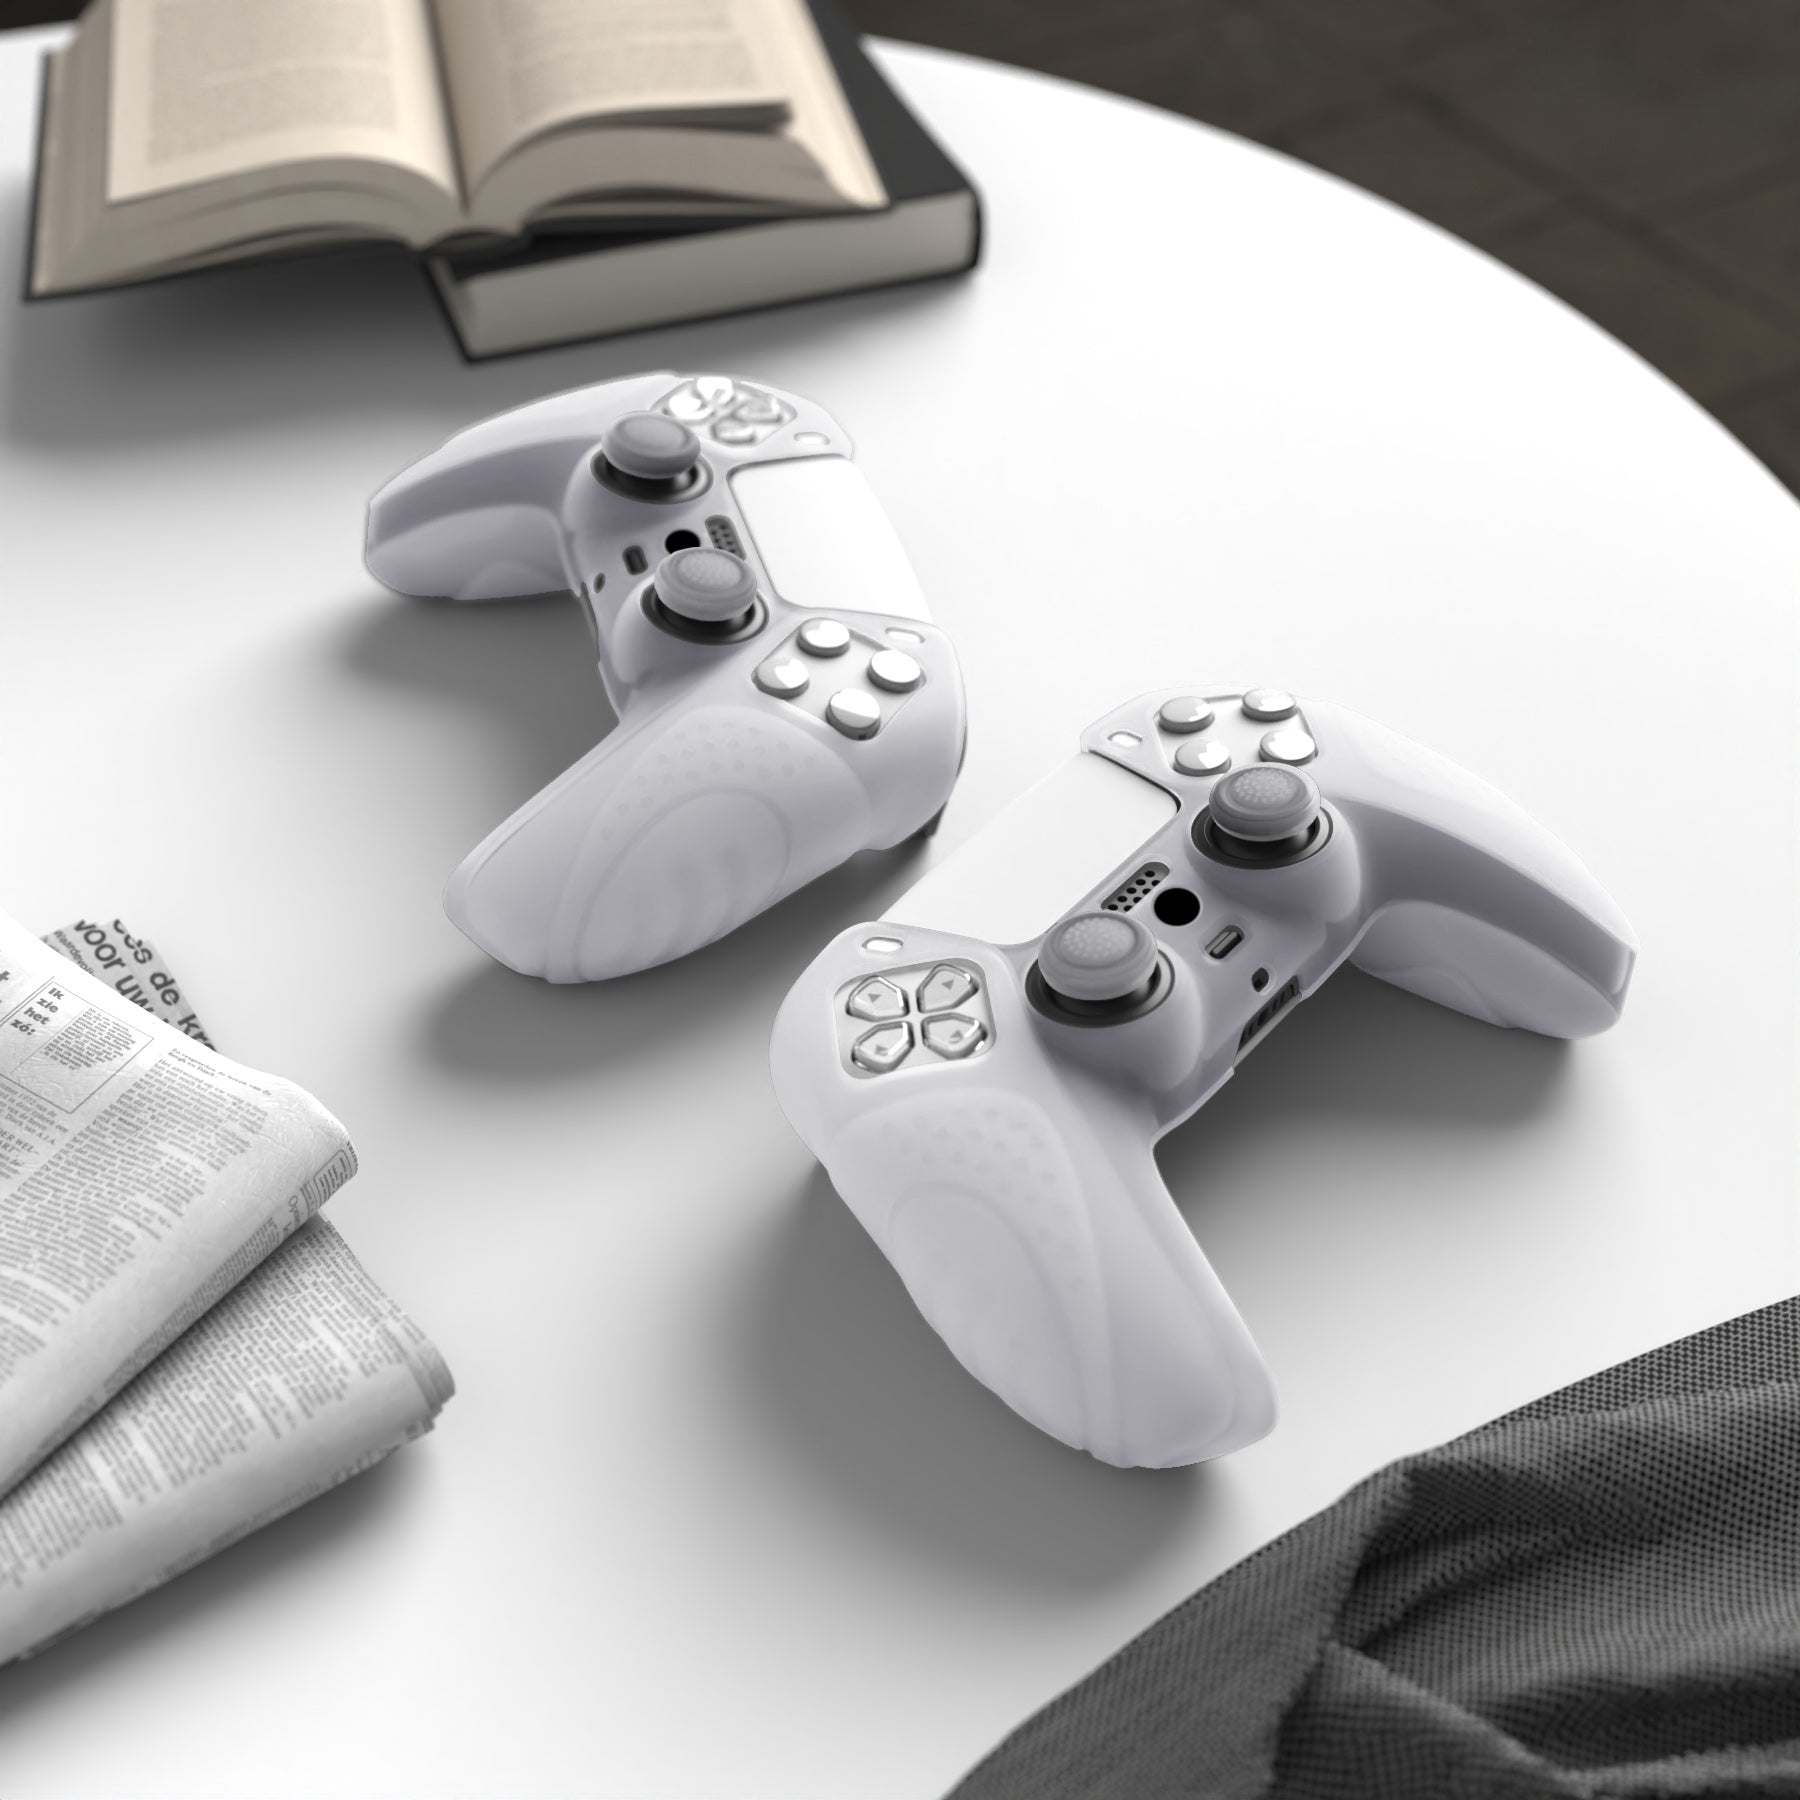 PlayVital Guardian Edition Anti-Slip Silicone Cover Skin with Thumb Grip Caps for PS5 Wireless Controller - Clear White - YHPF013 PlayVital